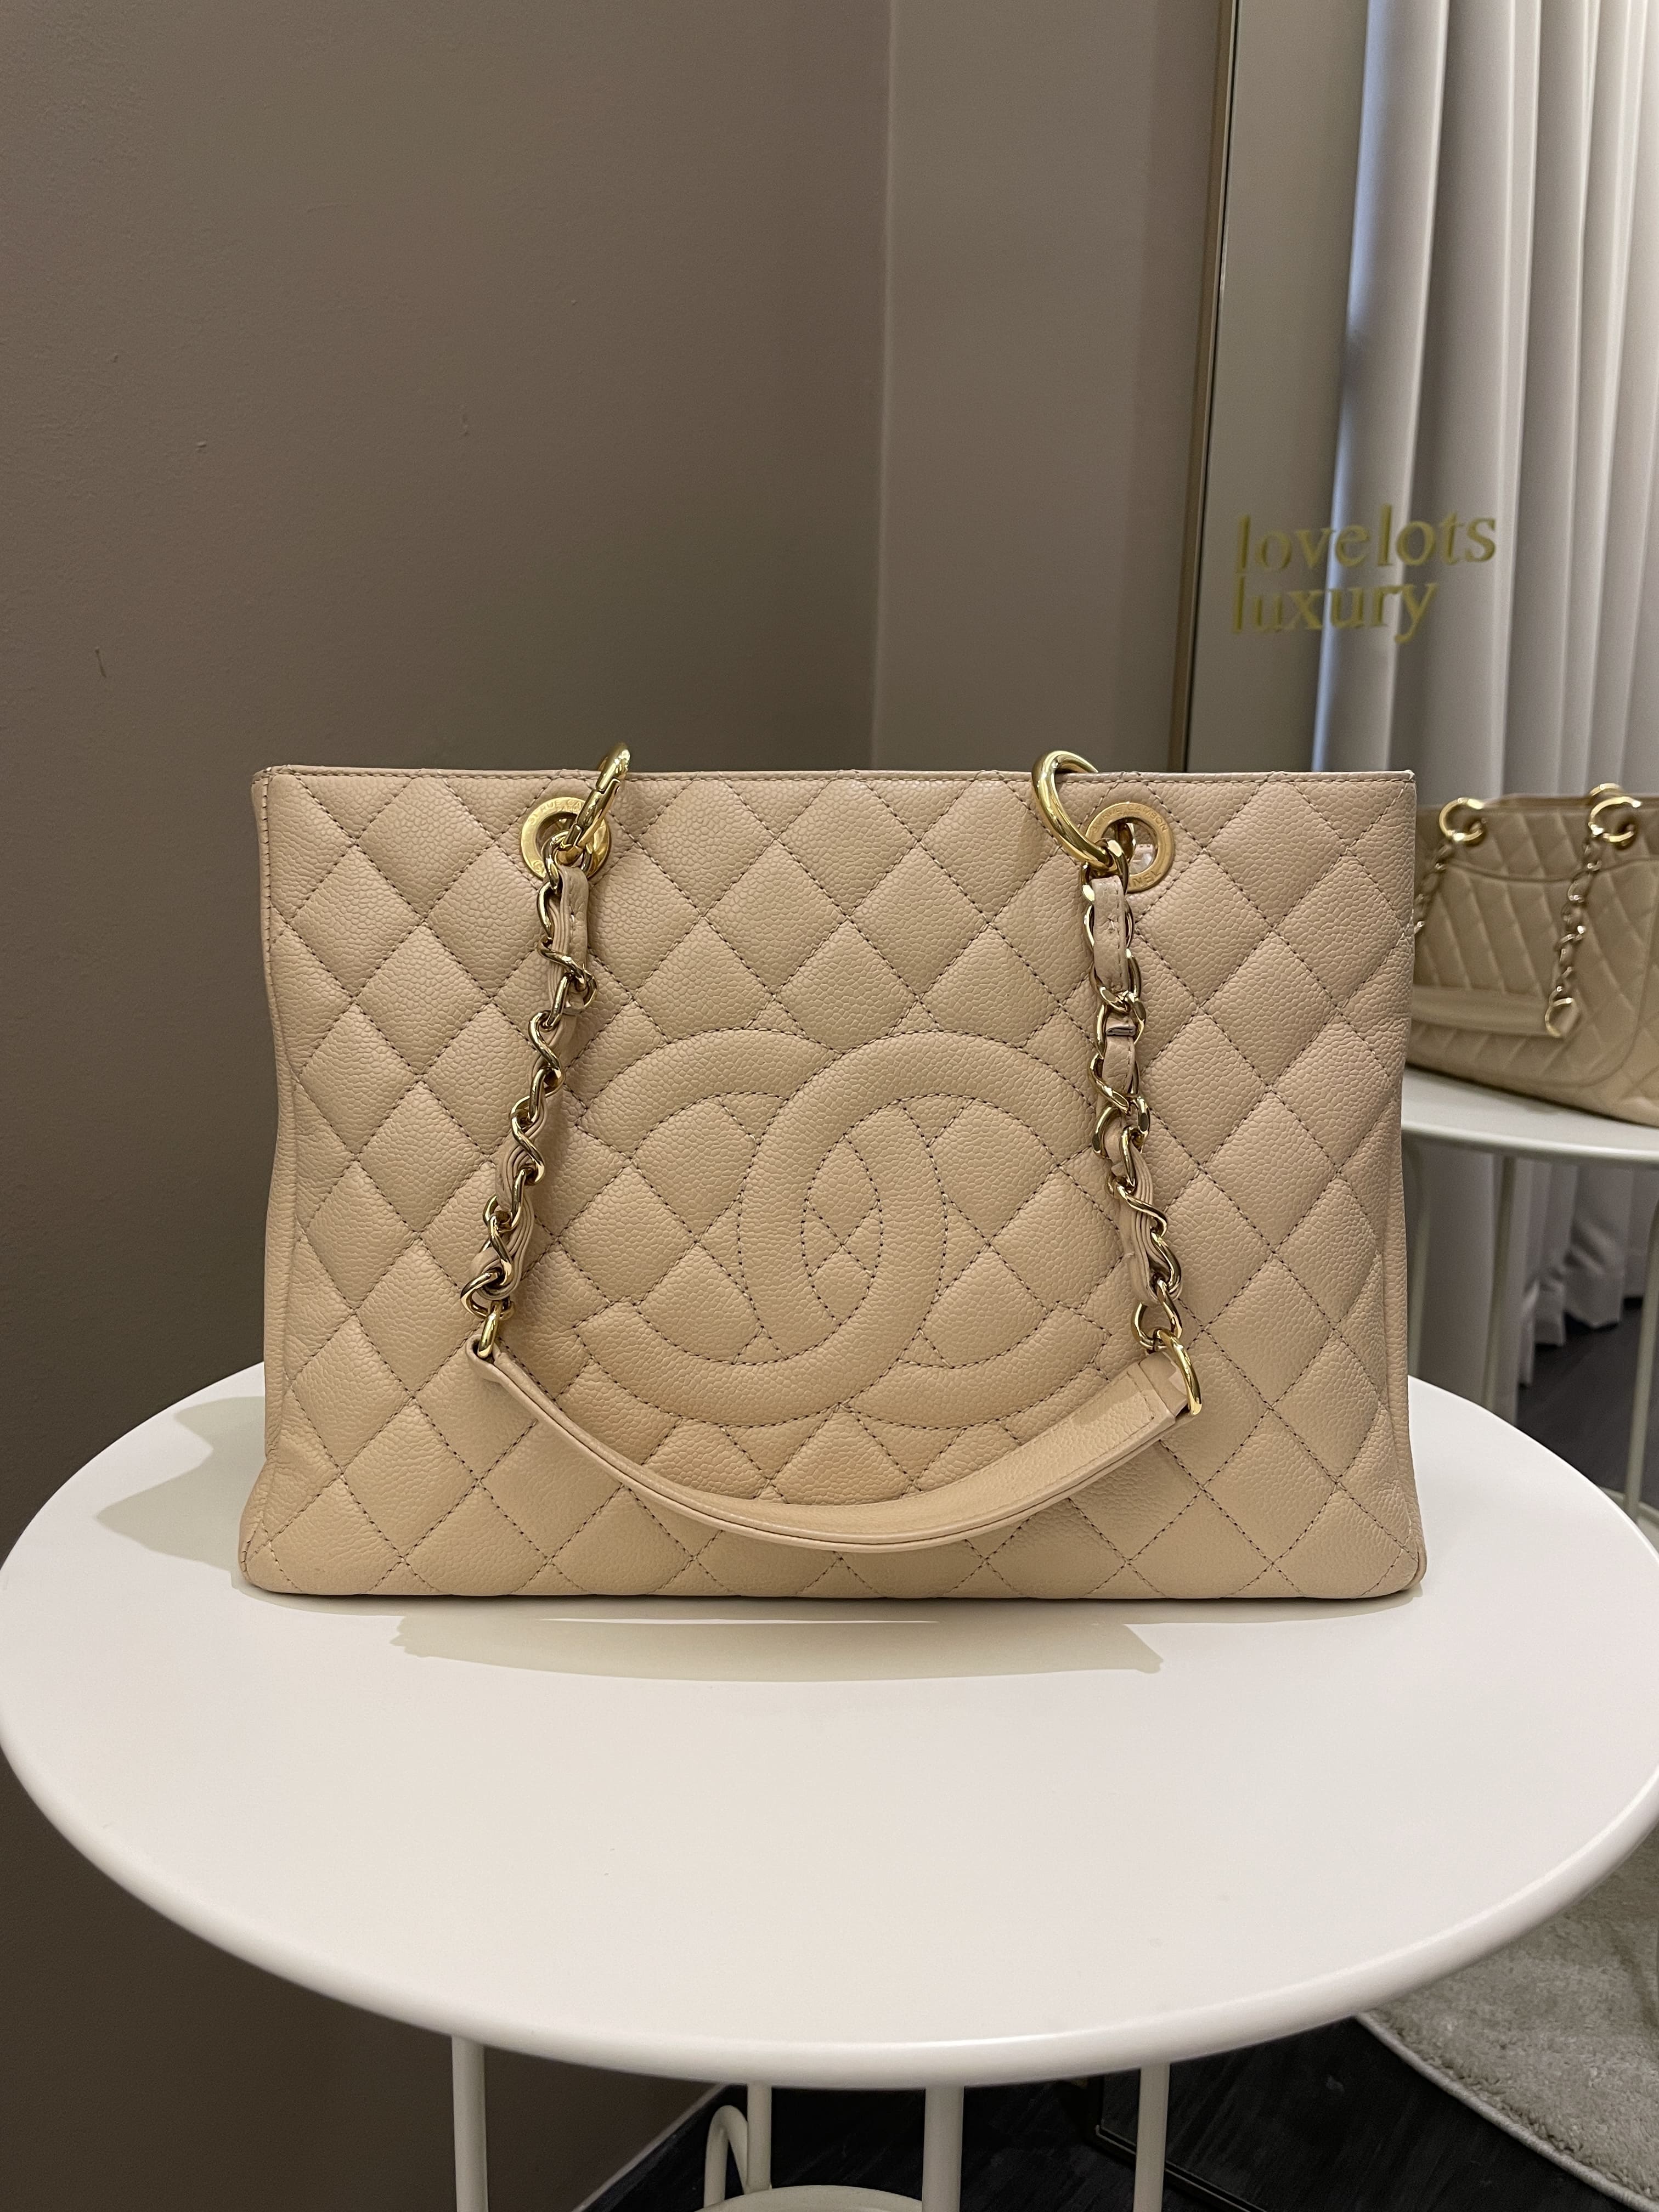 Chanel Classic Quilted GST Beige Caviar – ＬＯＶＥＬＯＴＳＬＵＸＵＲＹ